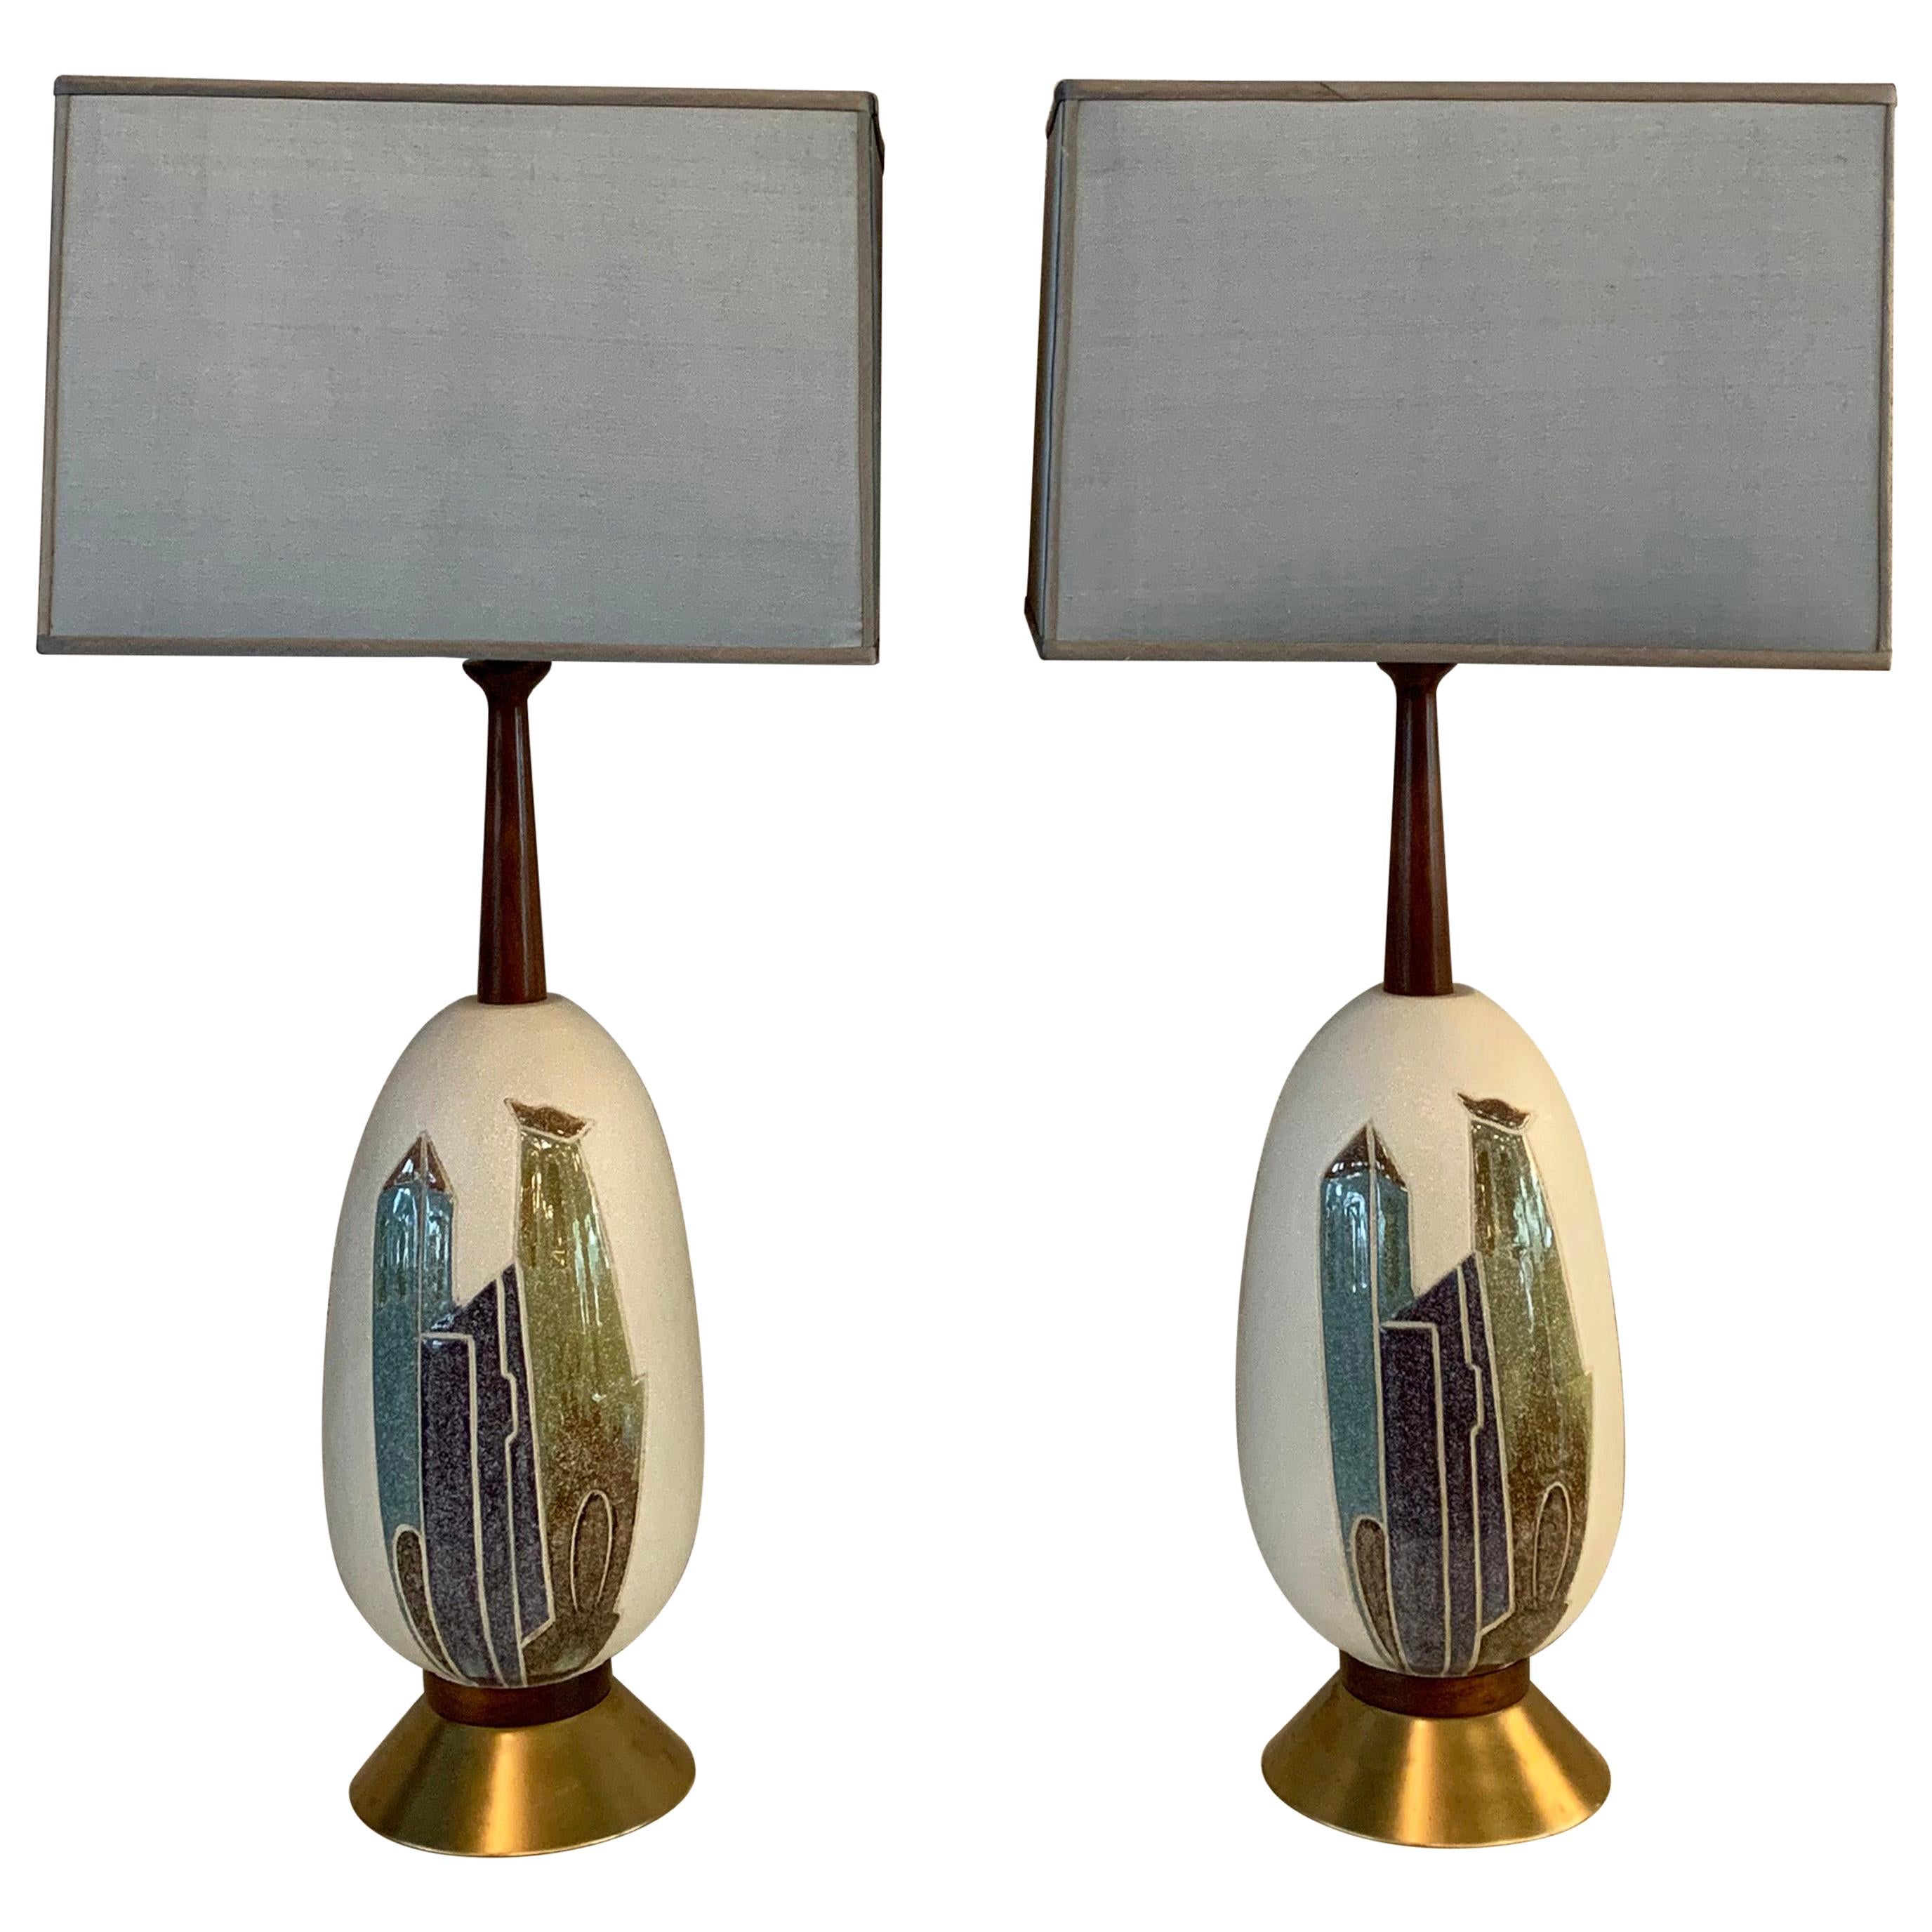 Pair of Mid-Century Modern Art Pottery Table Lamps